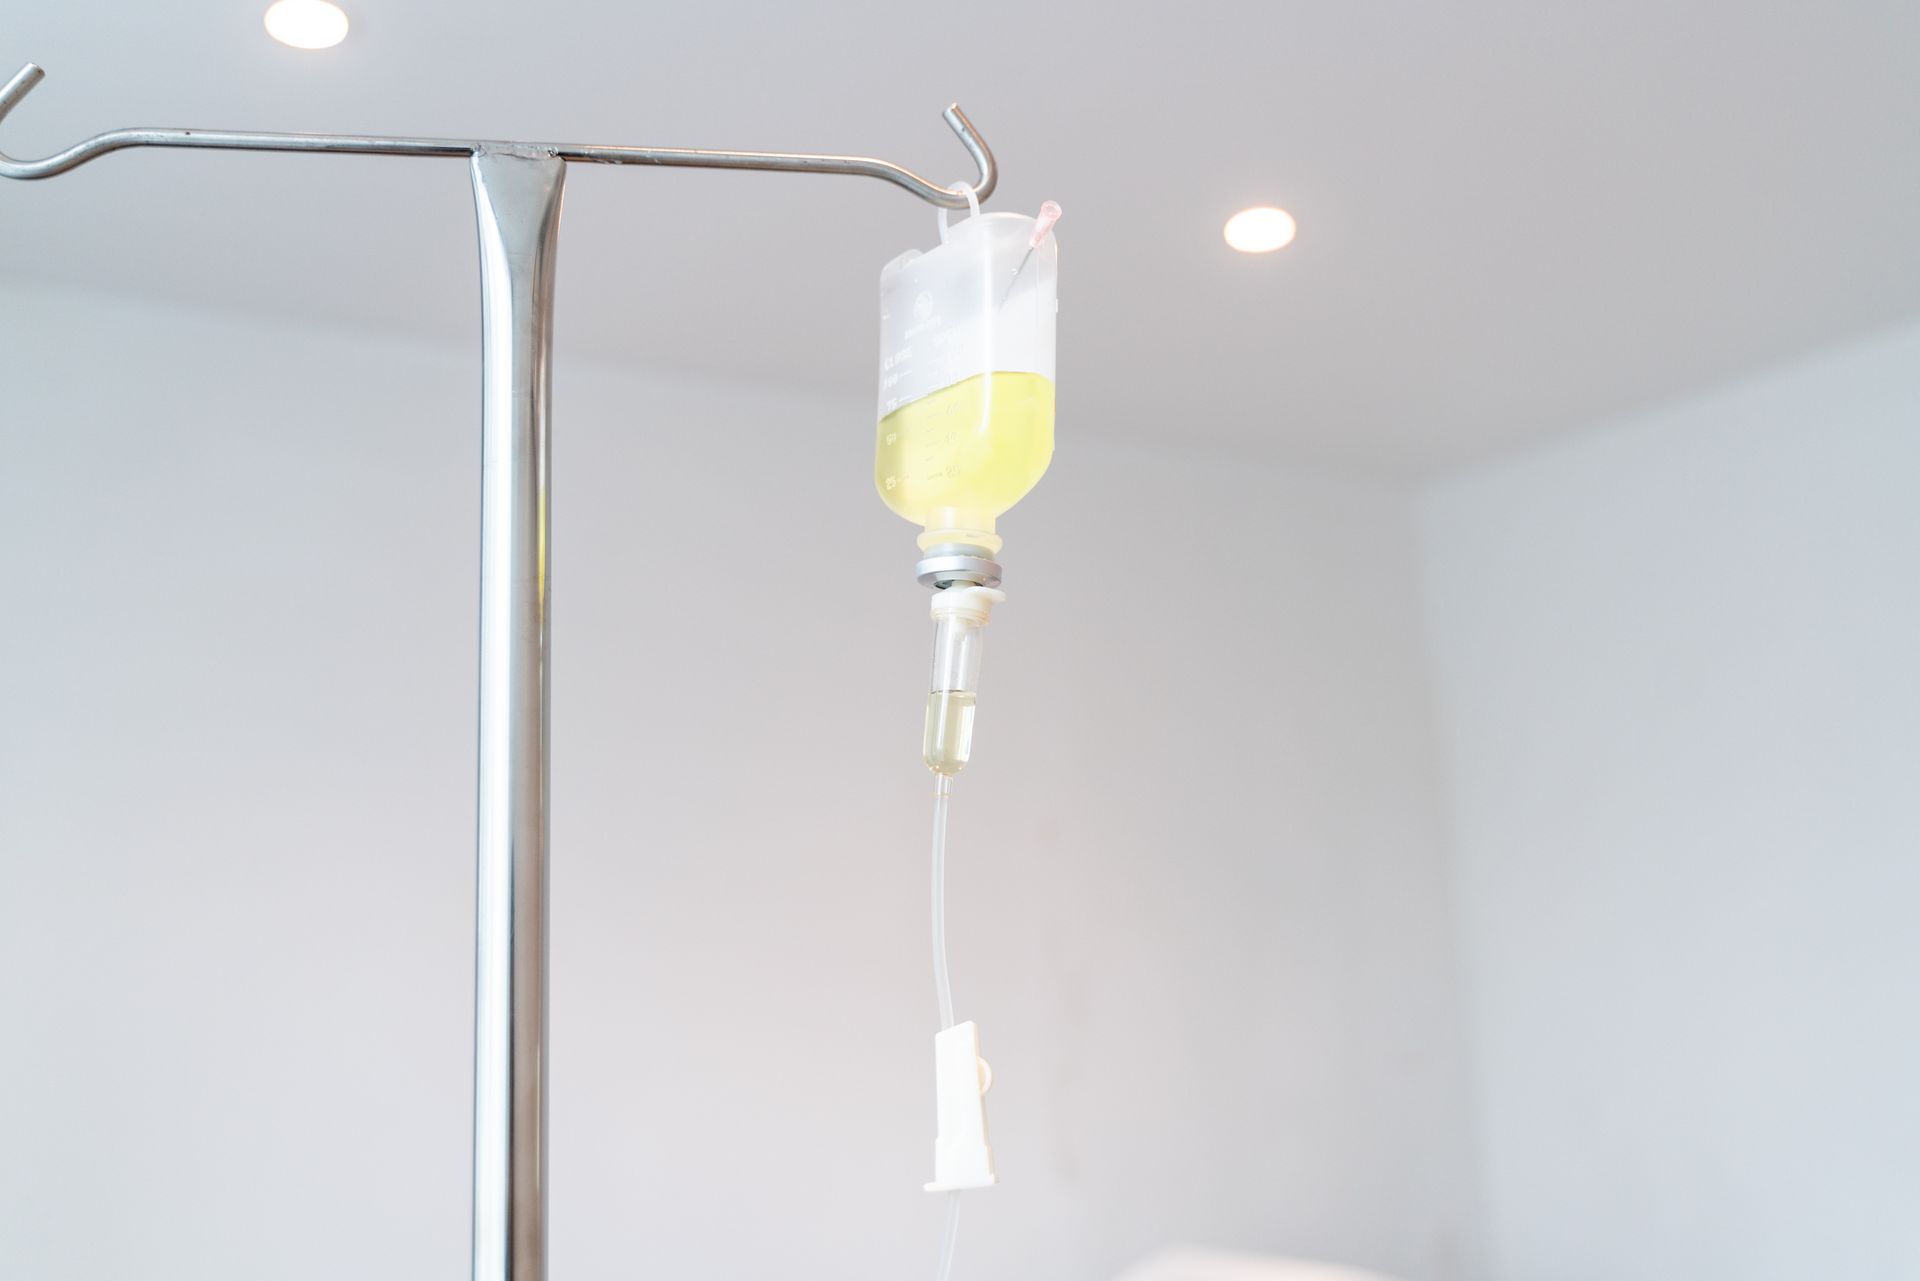 a drip with a yellow liquid hanging from it